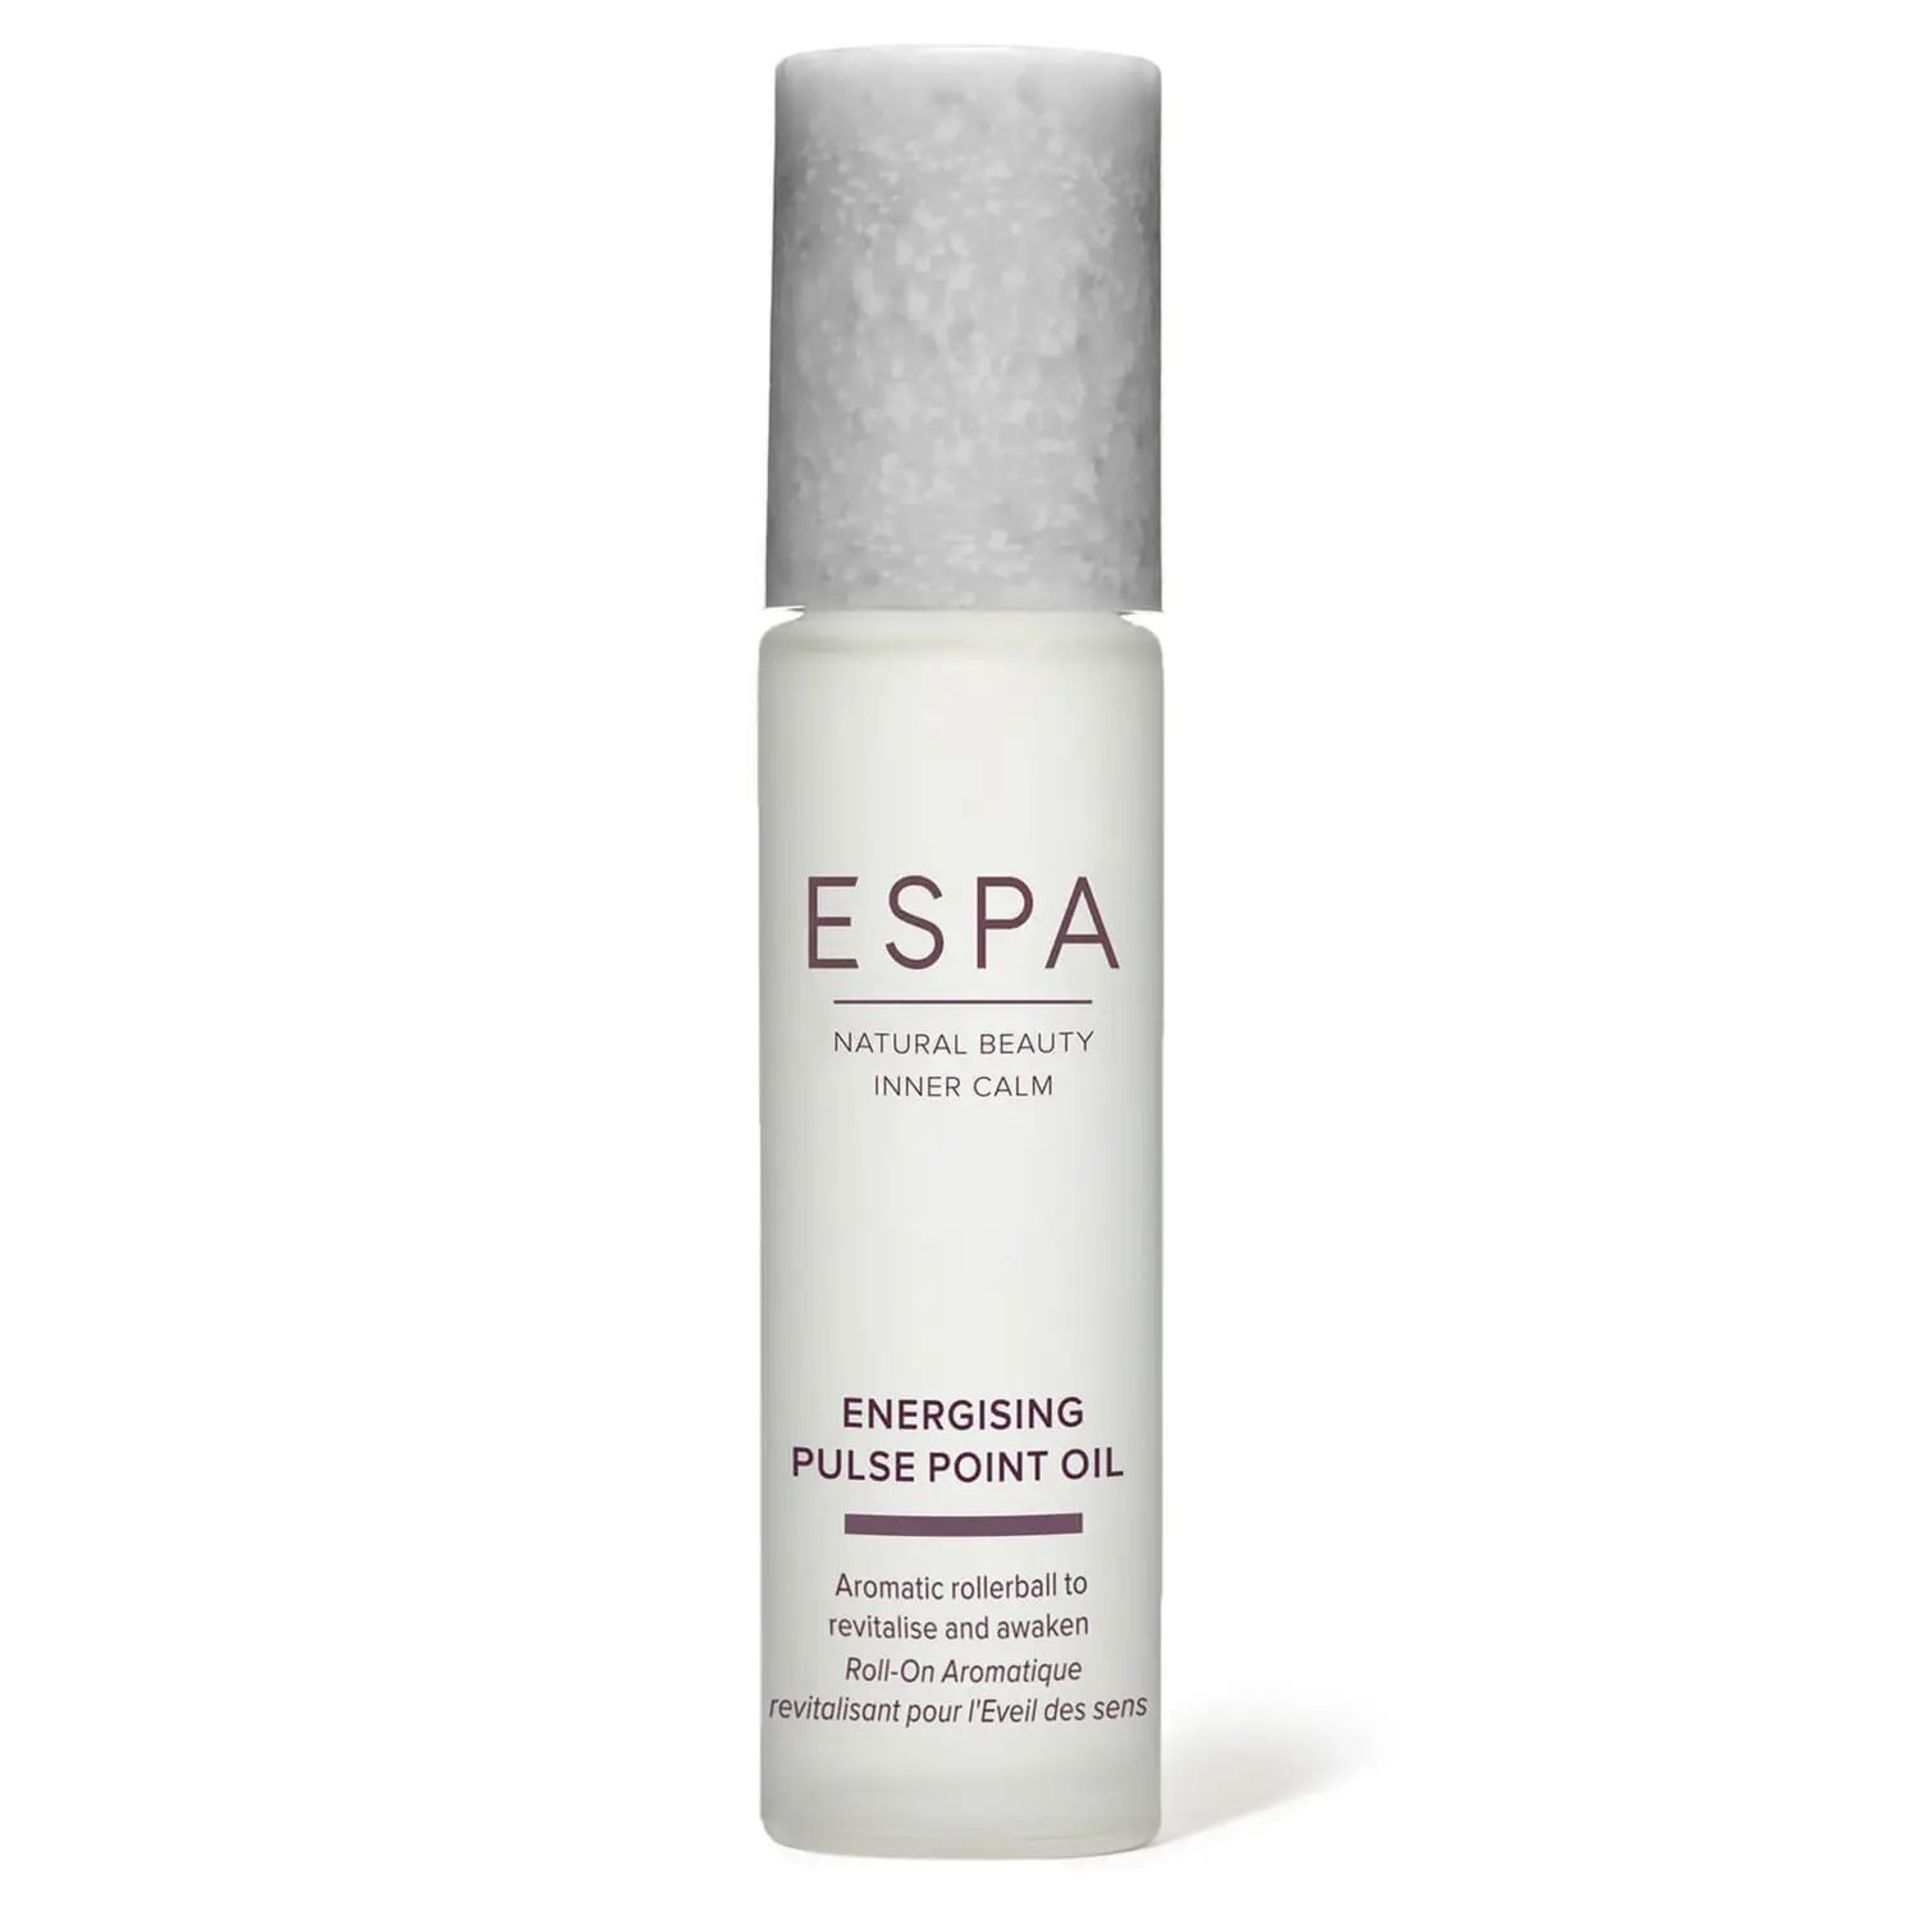 10x NEW ESPA Energising Pulse Point Oil 9ml. RRP £23 Each. EBR. A revitalising and zesty blend to